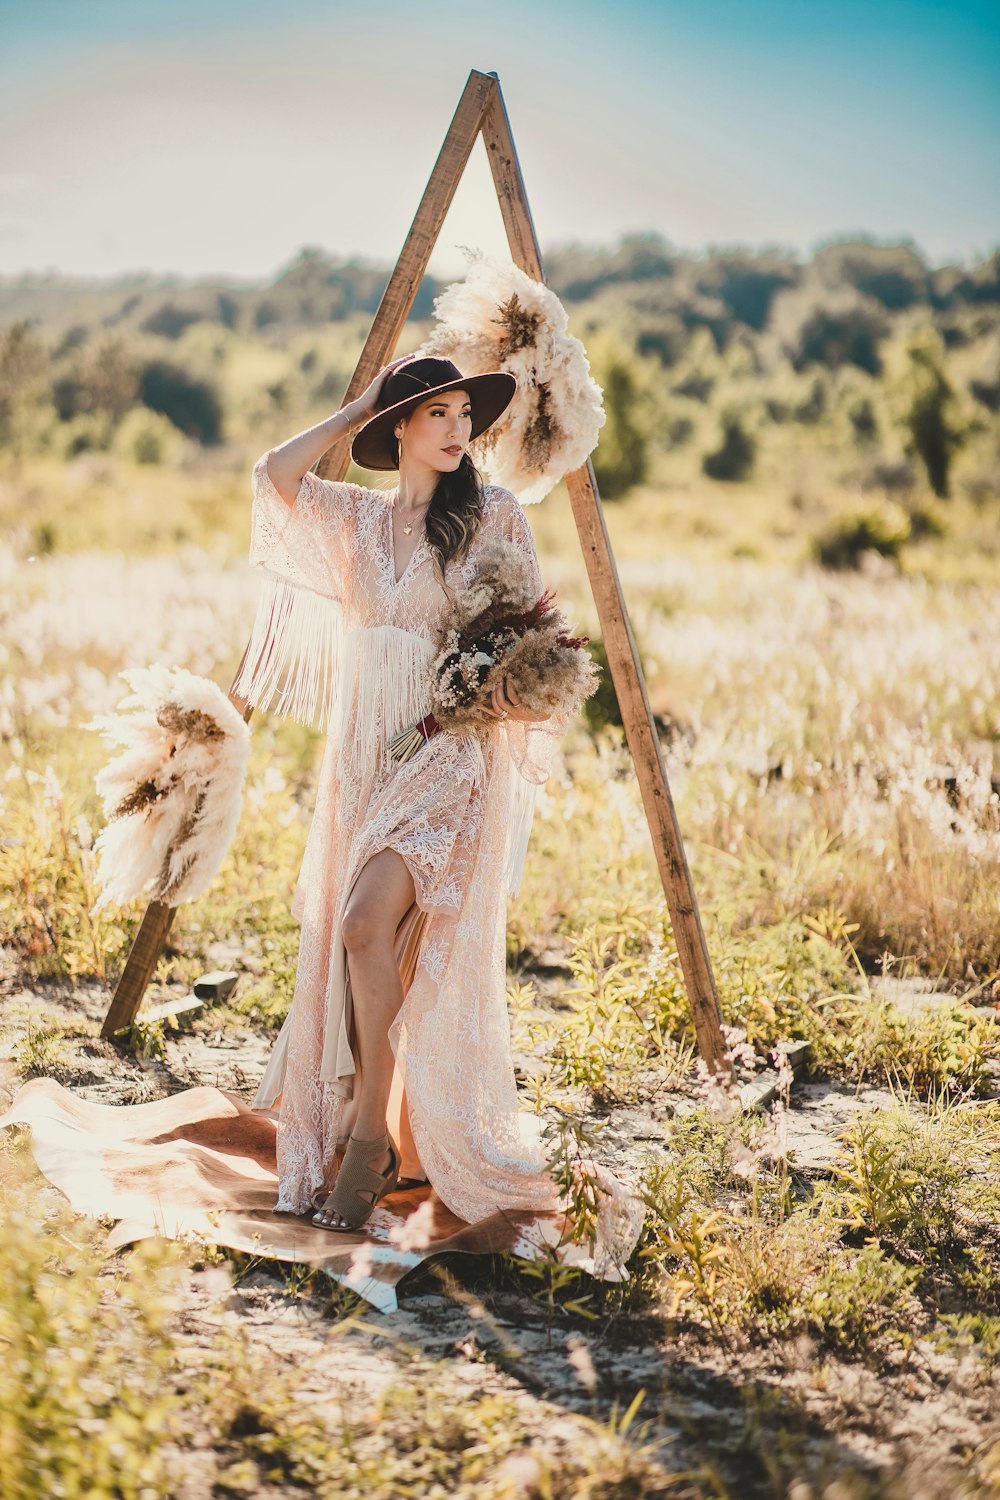 a person in a white dress holding a stick in a field